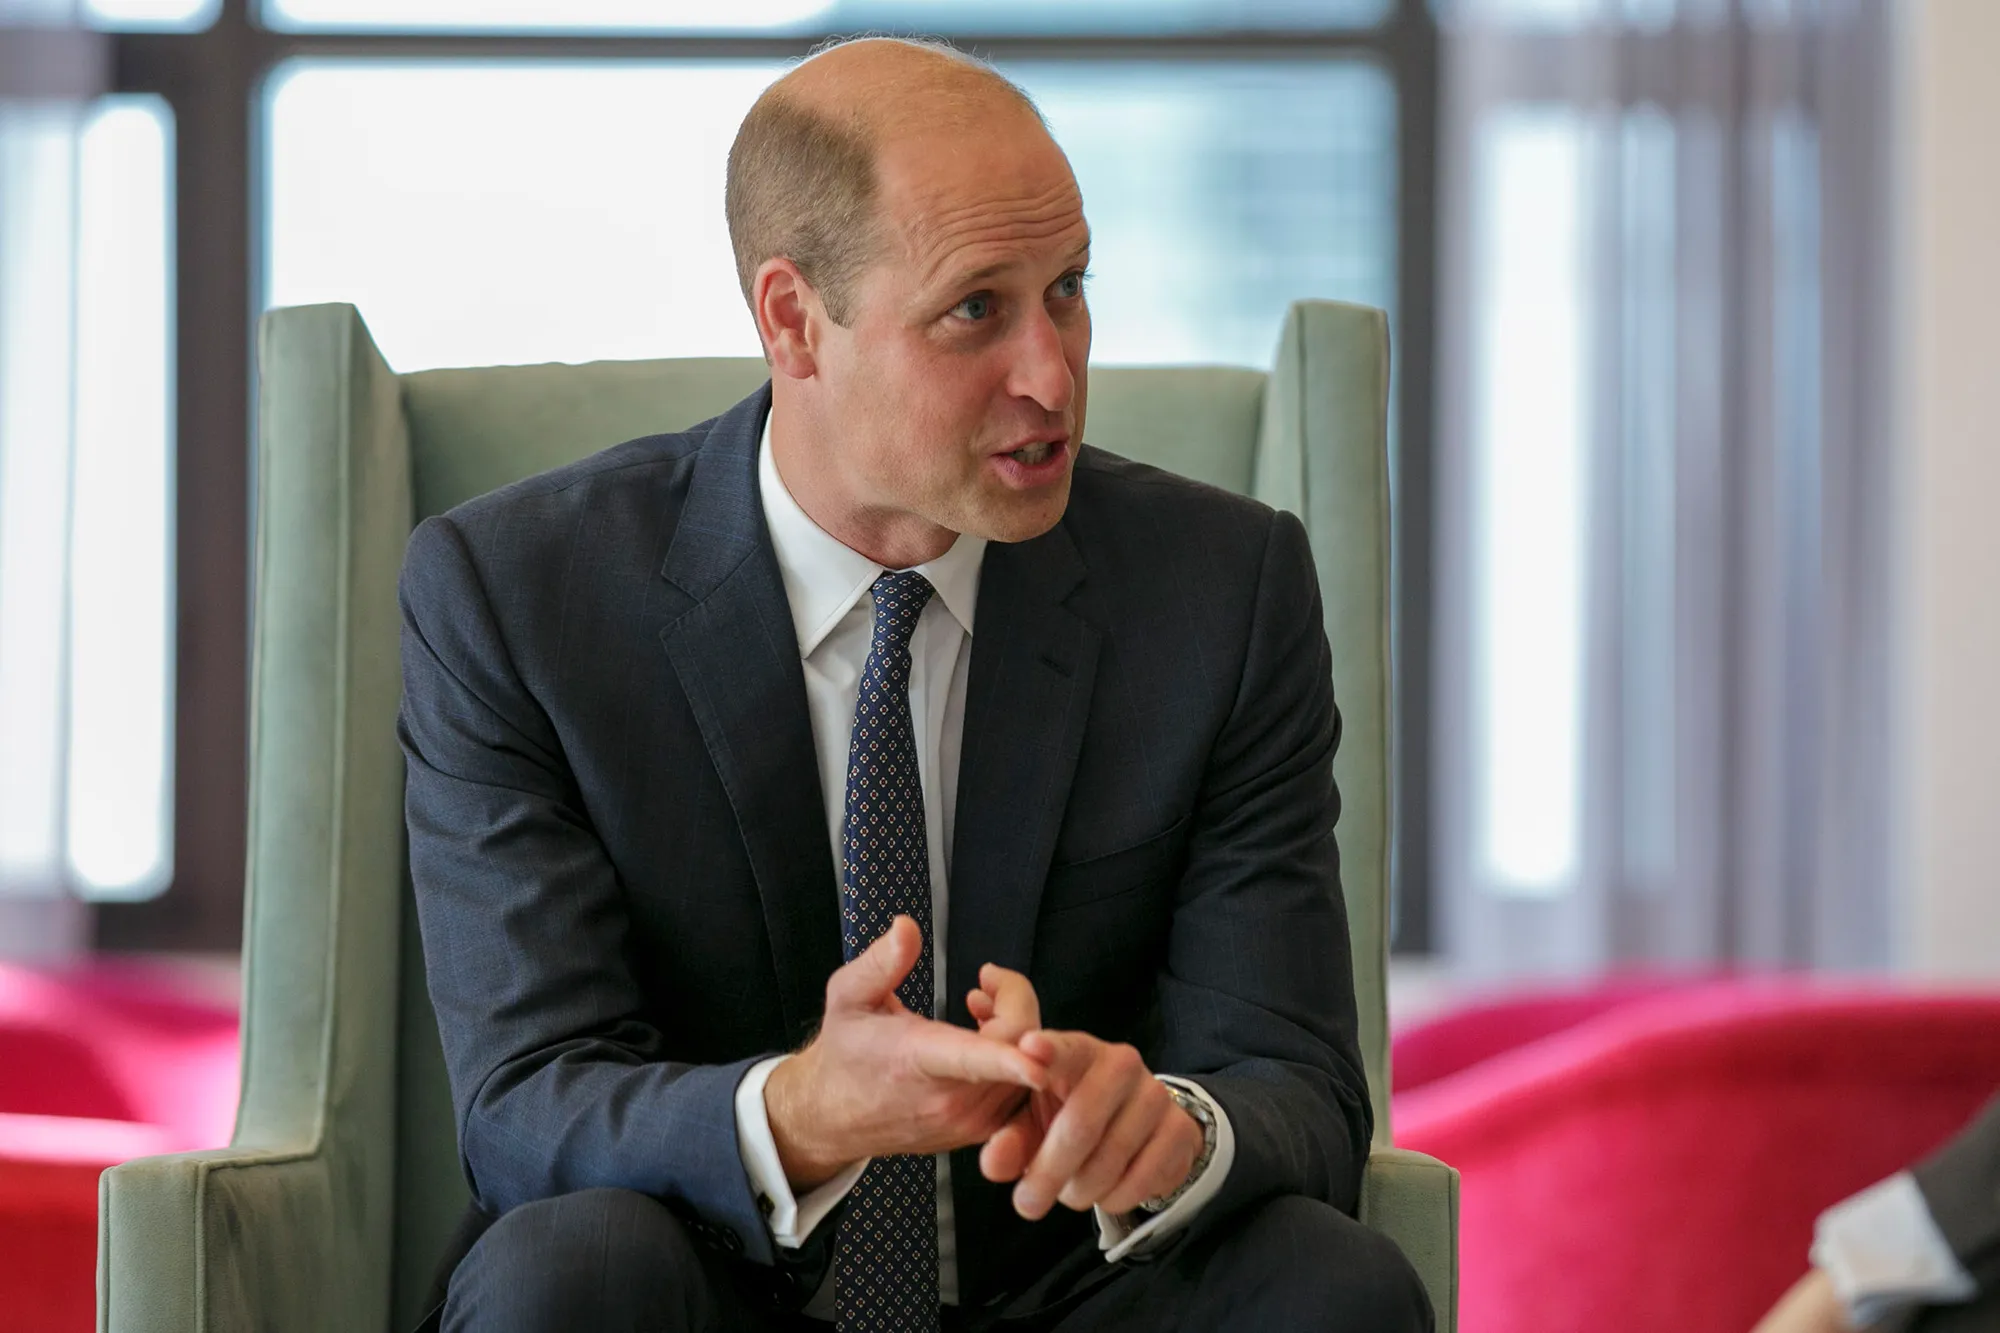 William's modern approach earns praise for championing important causes (Credits: Getty Images)